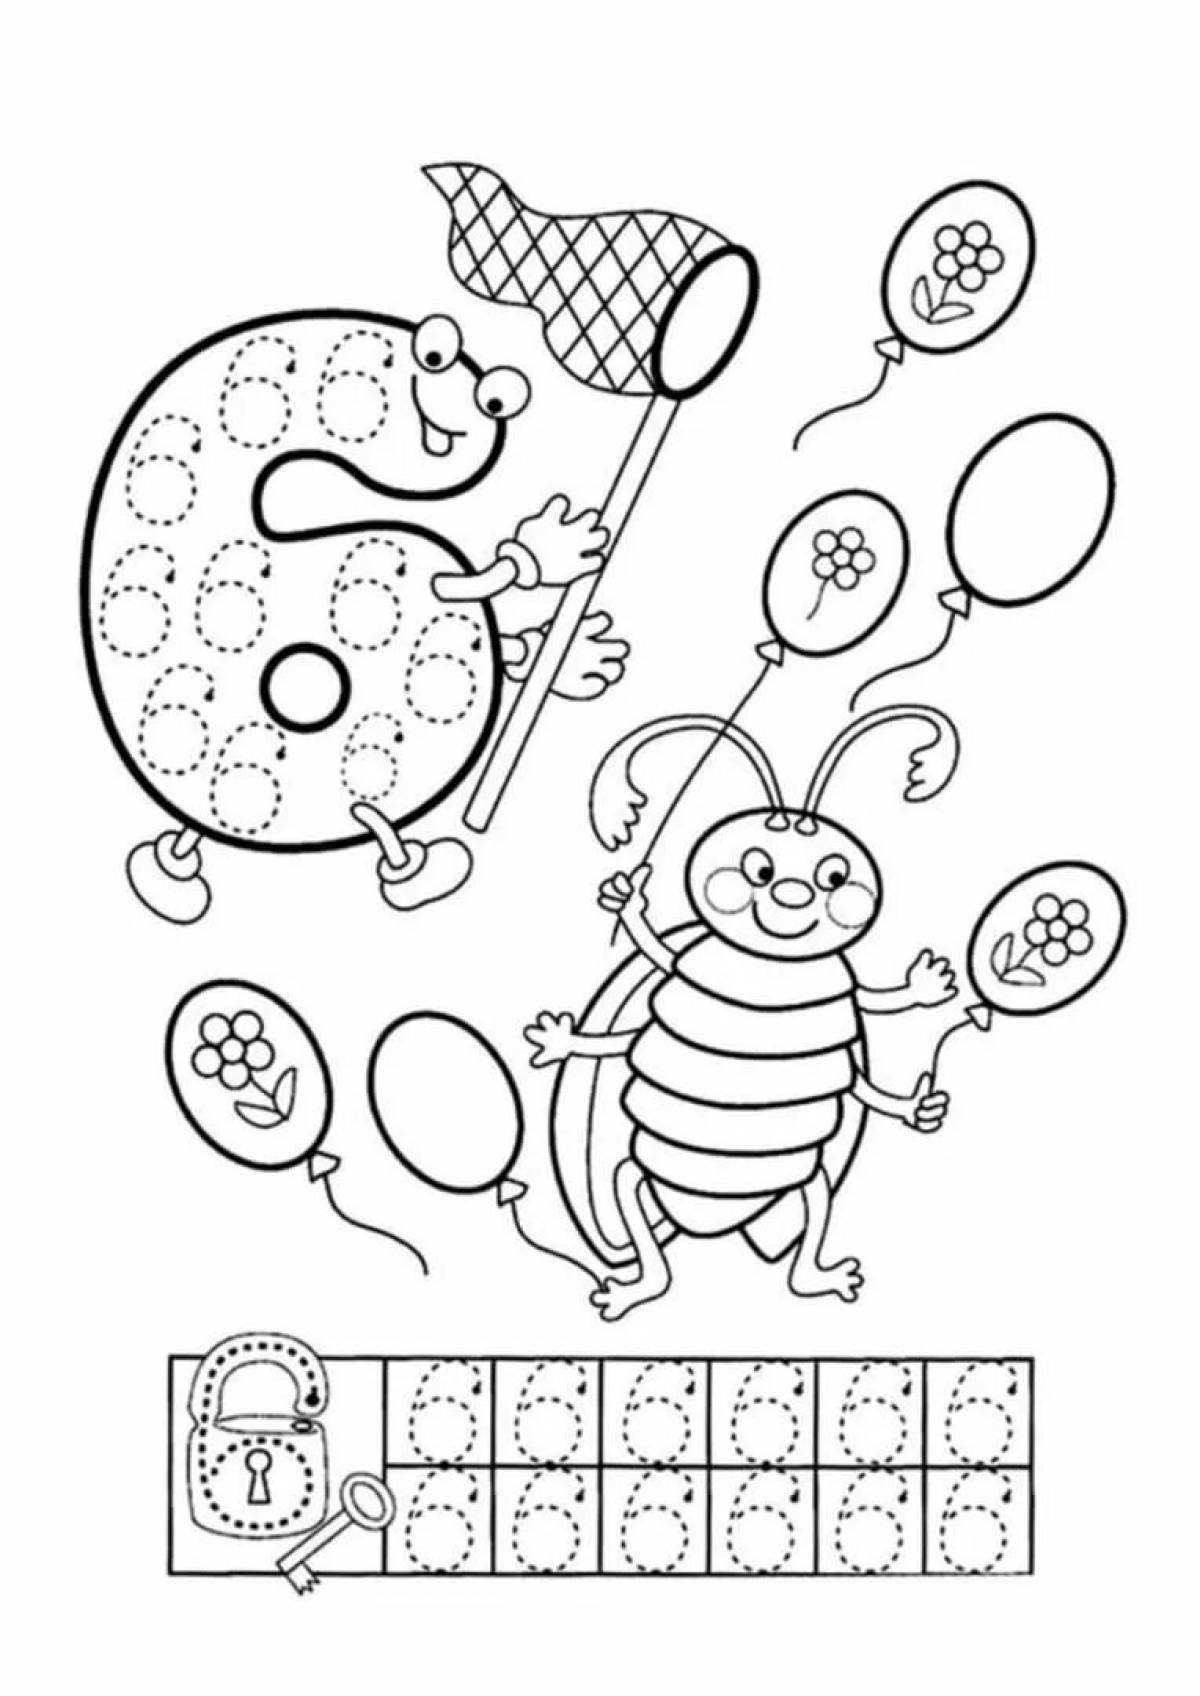 With letters and numbers for preschoolers #26